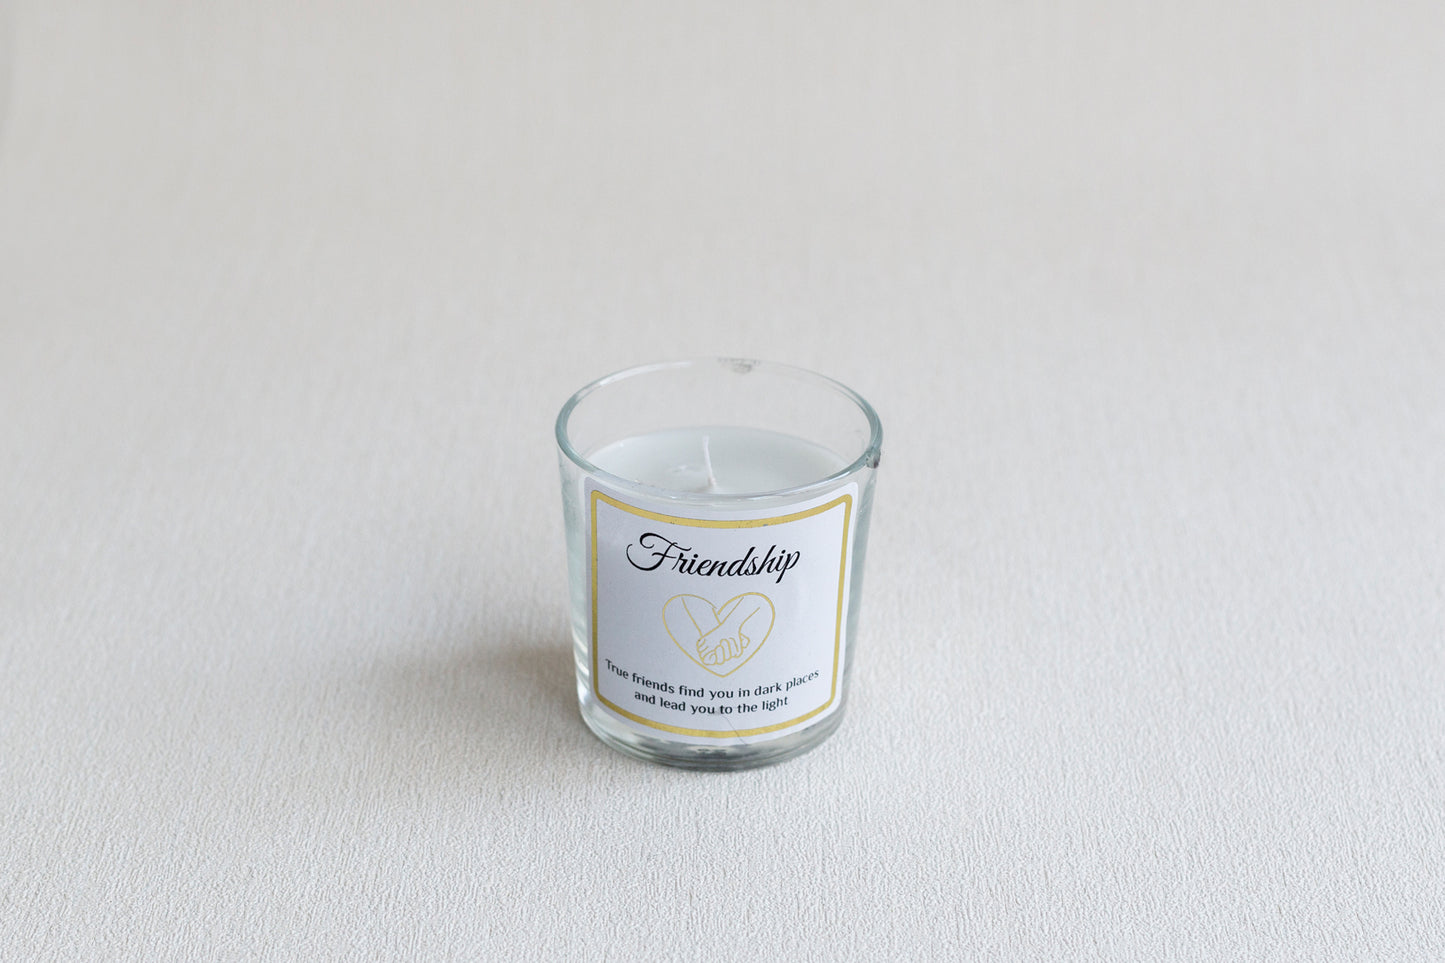 Law of Attraction Friendship Candle